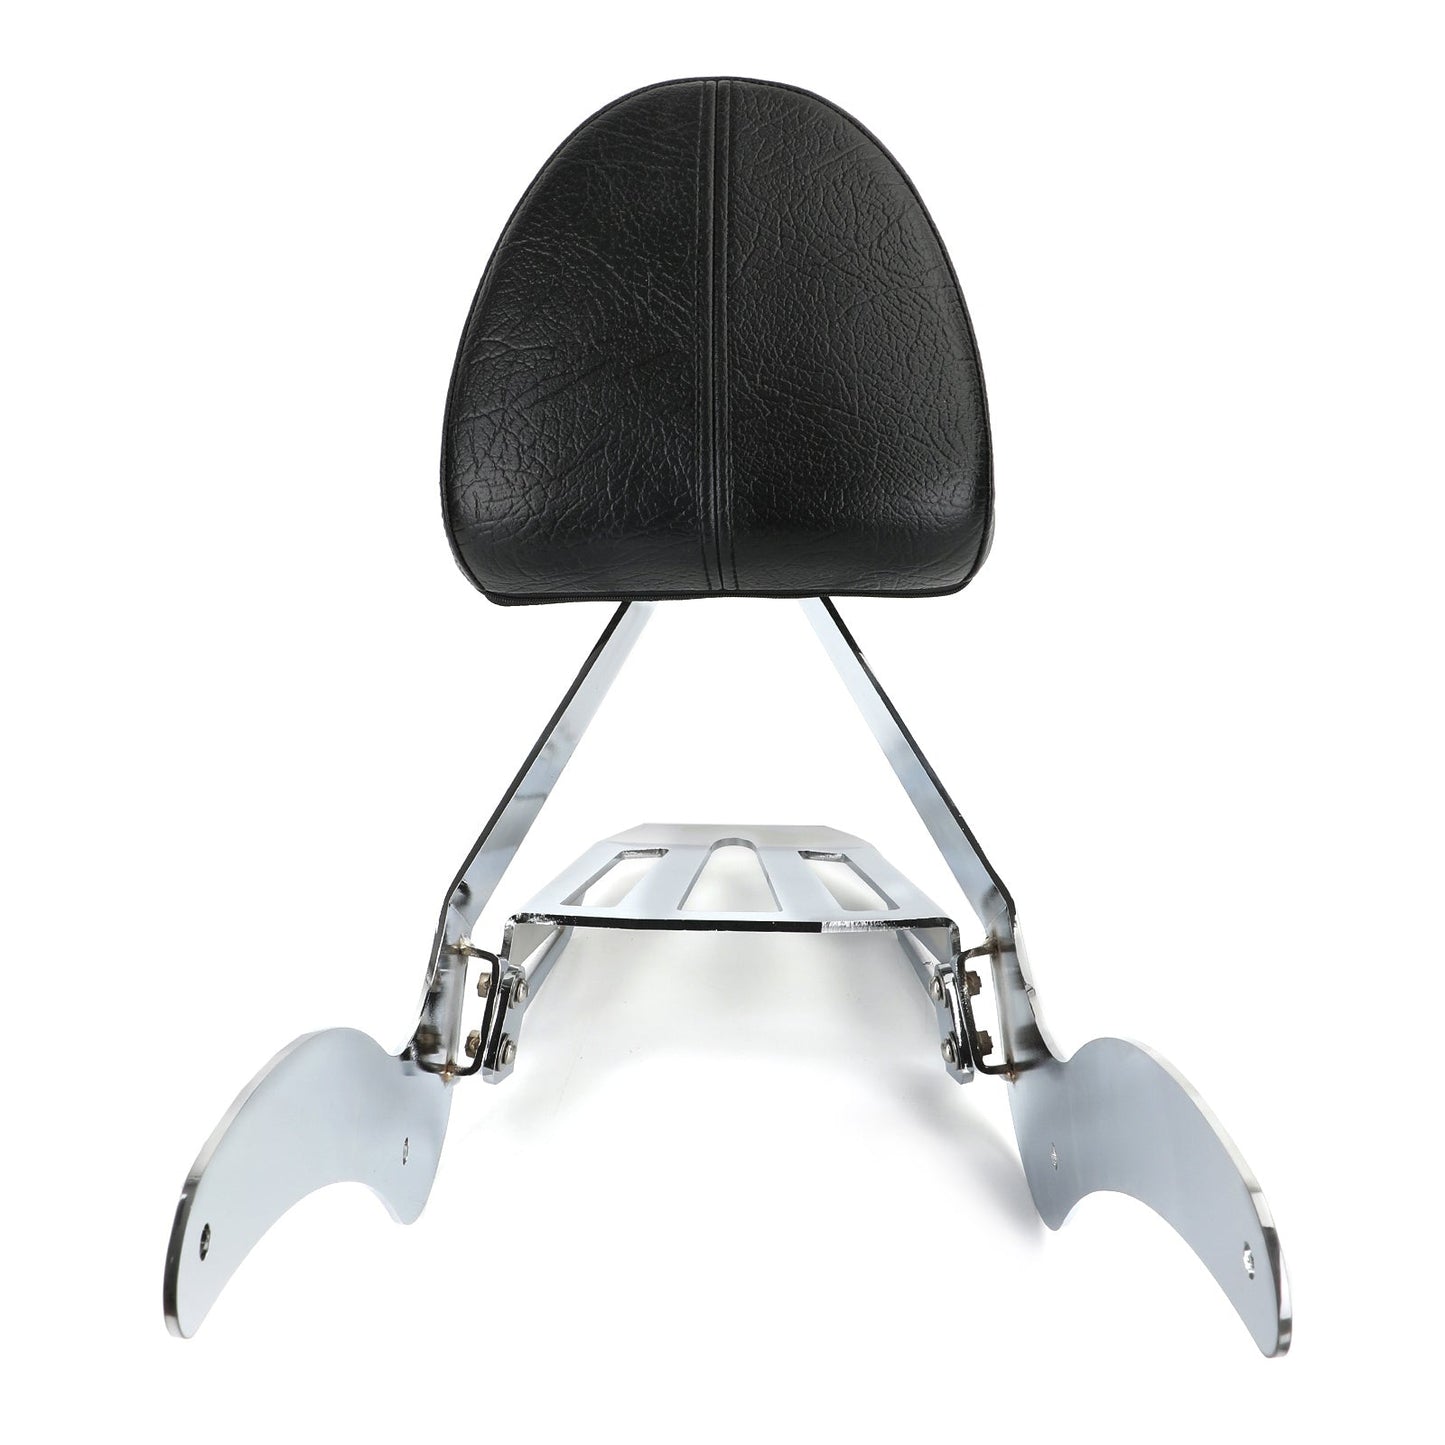 Passenger Sissy Bar Backrest Luggage Rack for Indian Scout Sixty 14-20